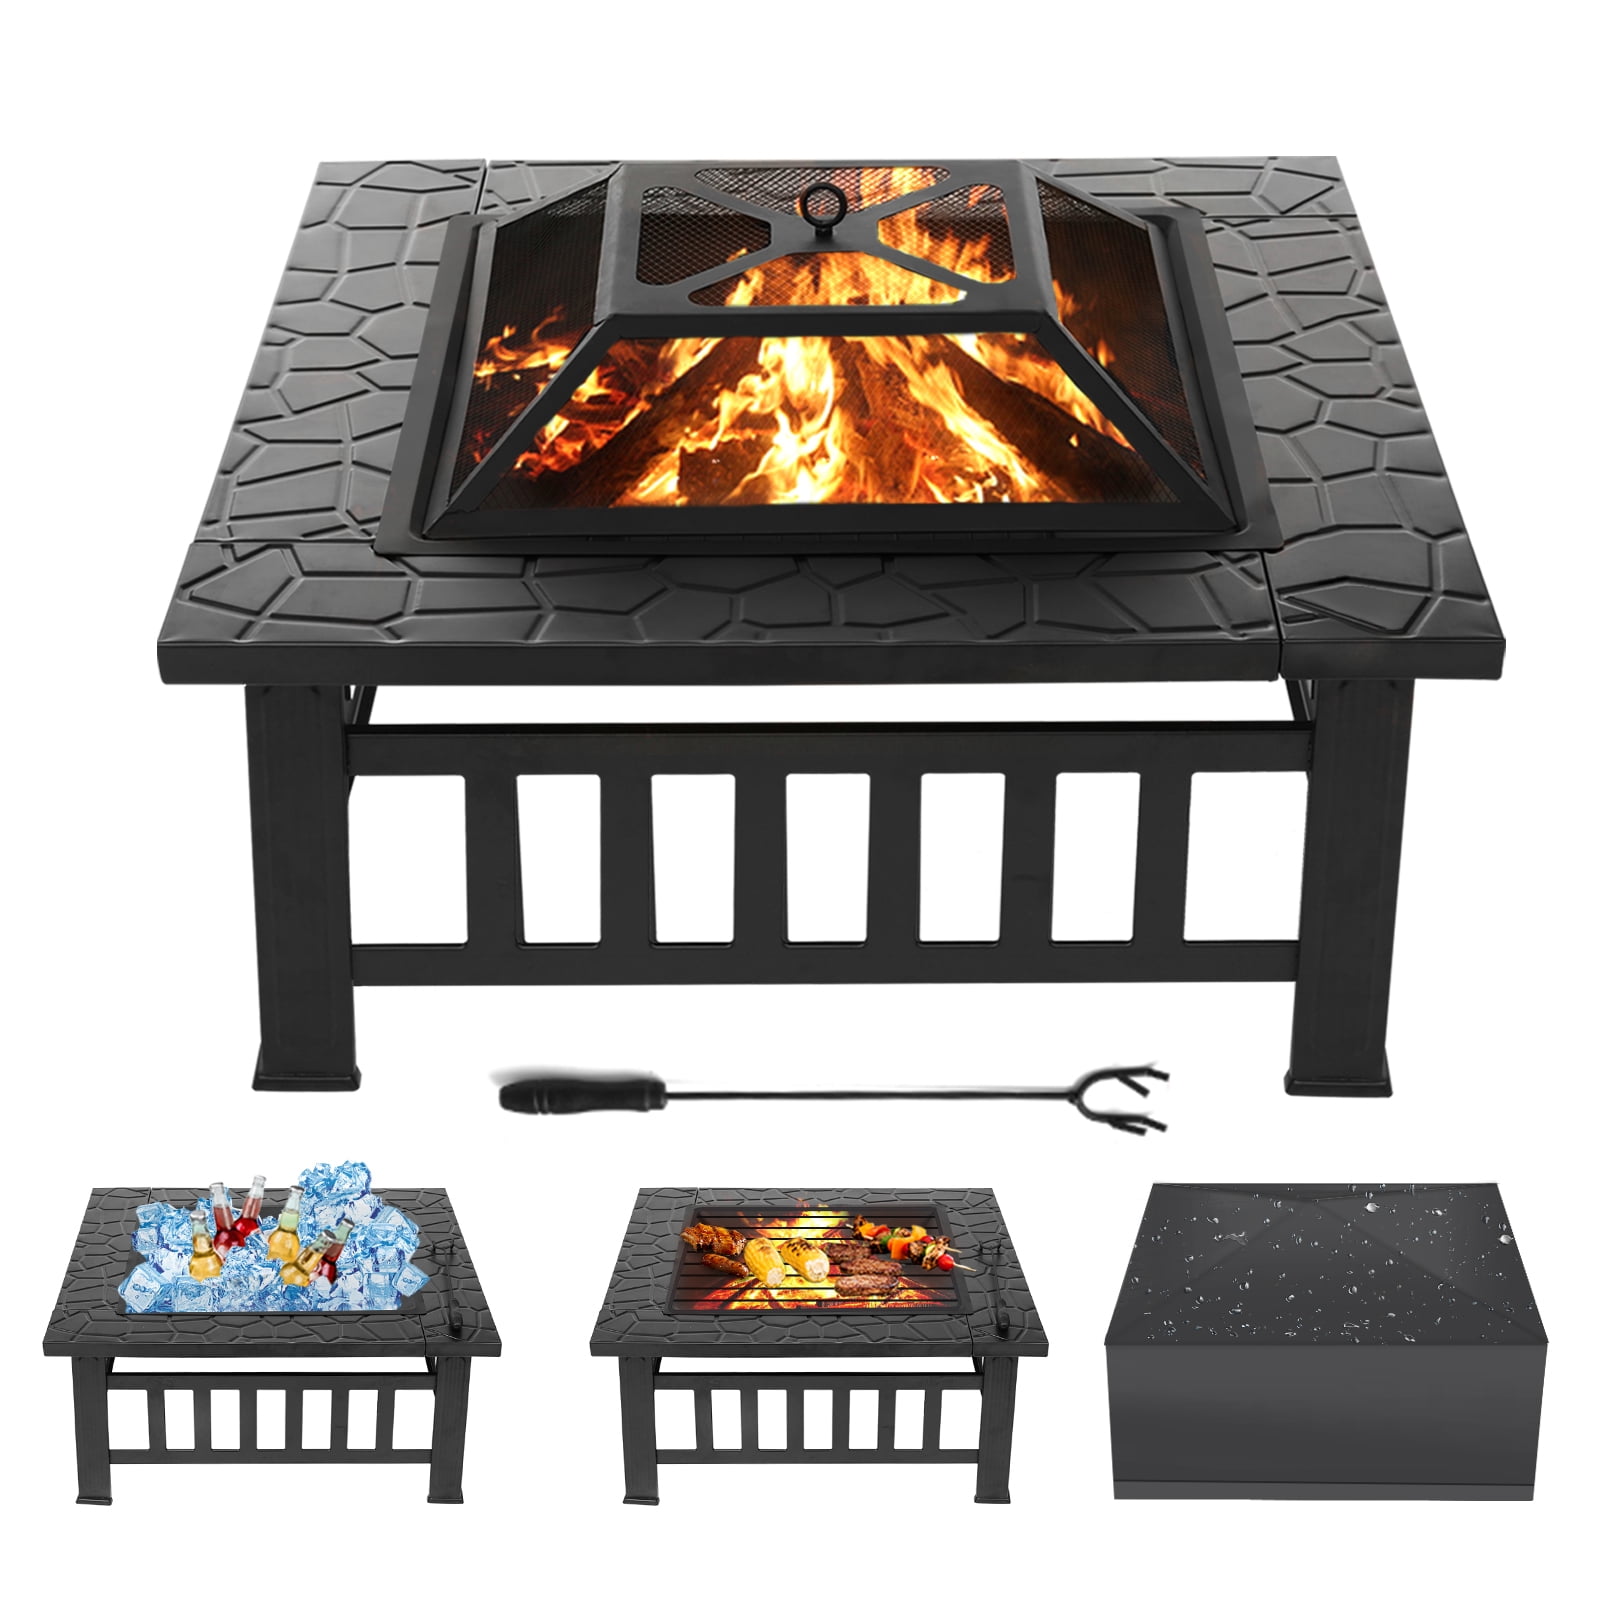 Outdoor 32'' Fire Pit Square Metal BBQ Grill Stove Wood Burning Pit Bonfire  Pit Patio Chimenea for Family Friend Kids Barbeque Party Camping, Heating,  Picnic in Backyard Patio Garden-Black - Walmart.com